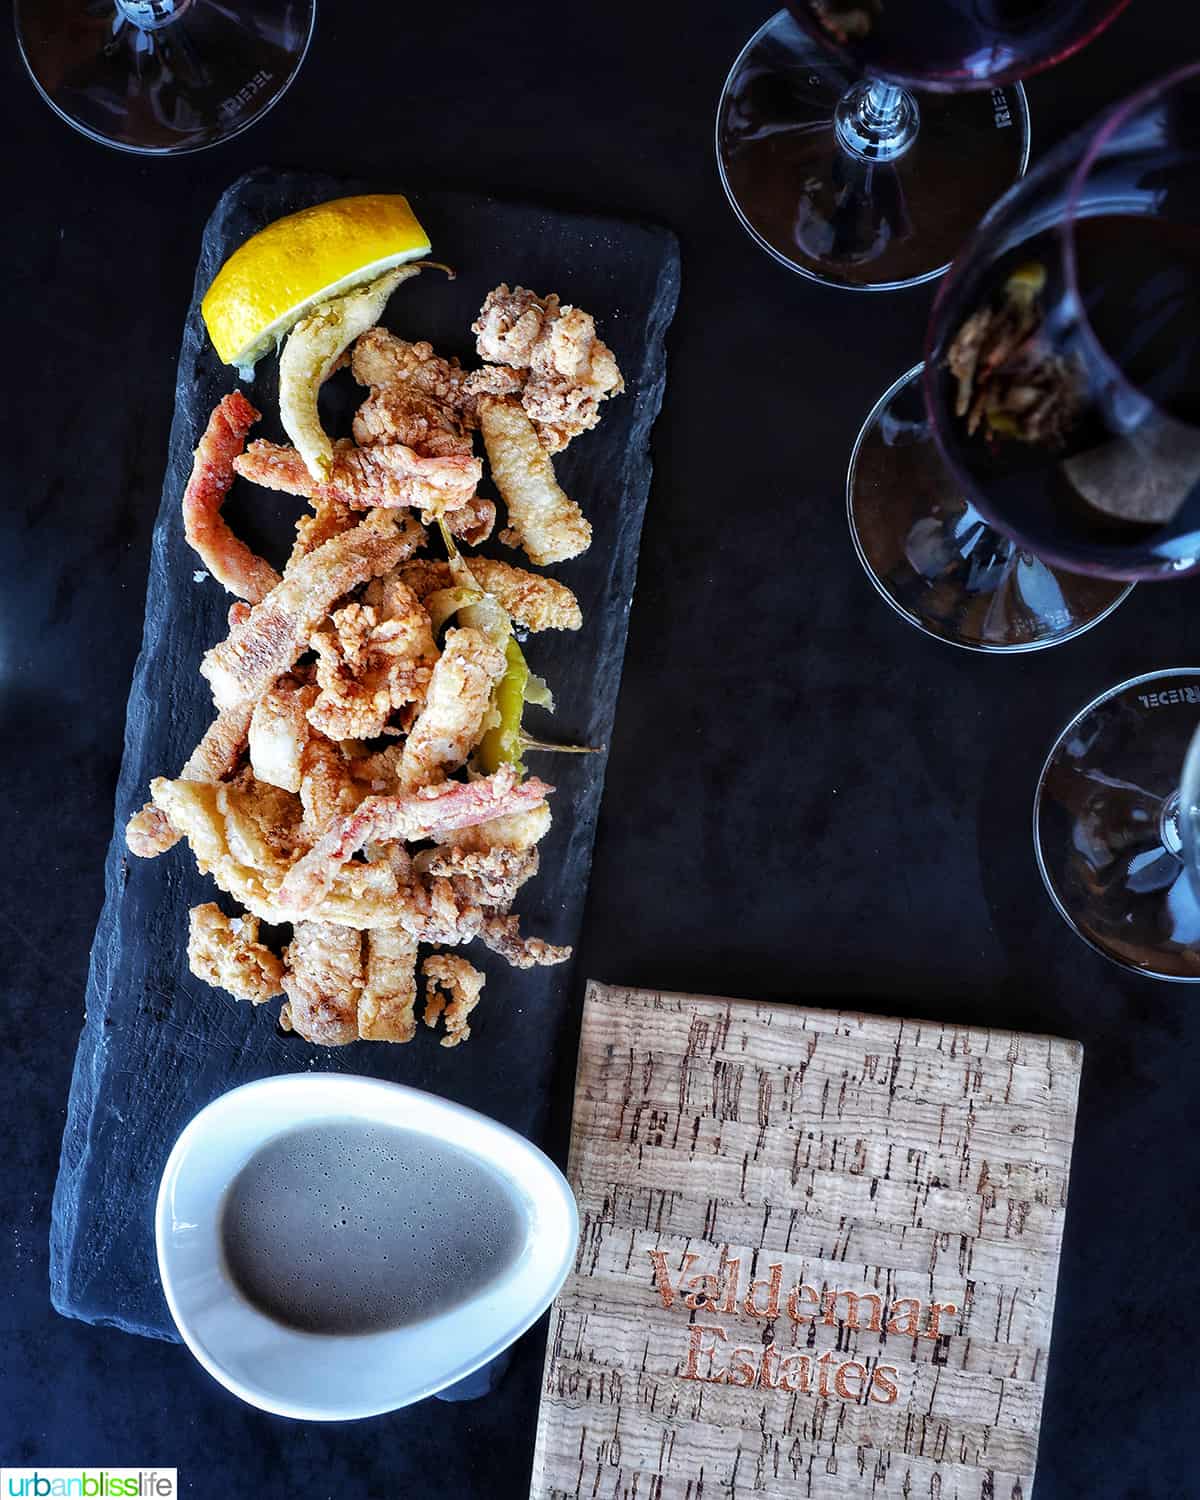 black stone serving plate of fried calamari next to a tasting menu and glasses of wine.